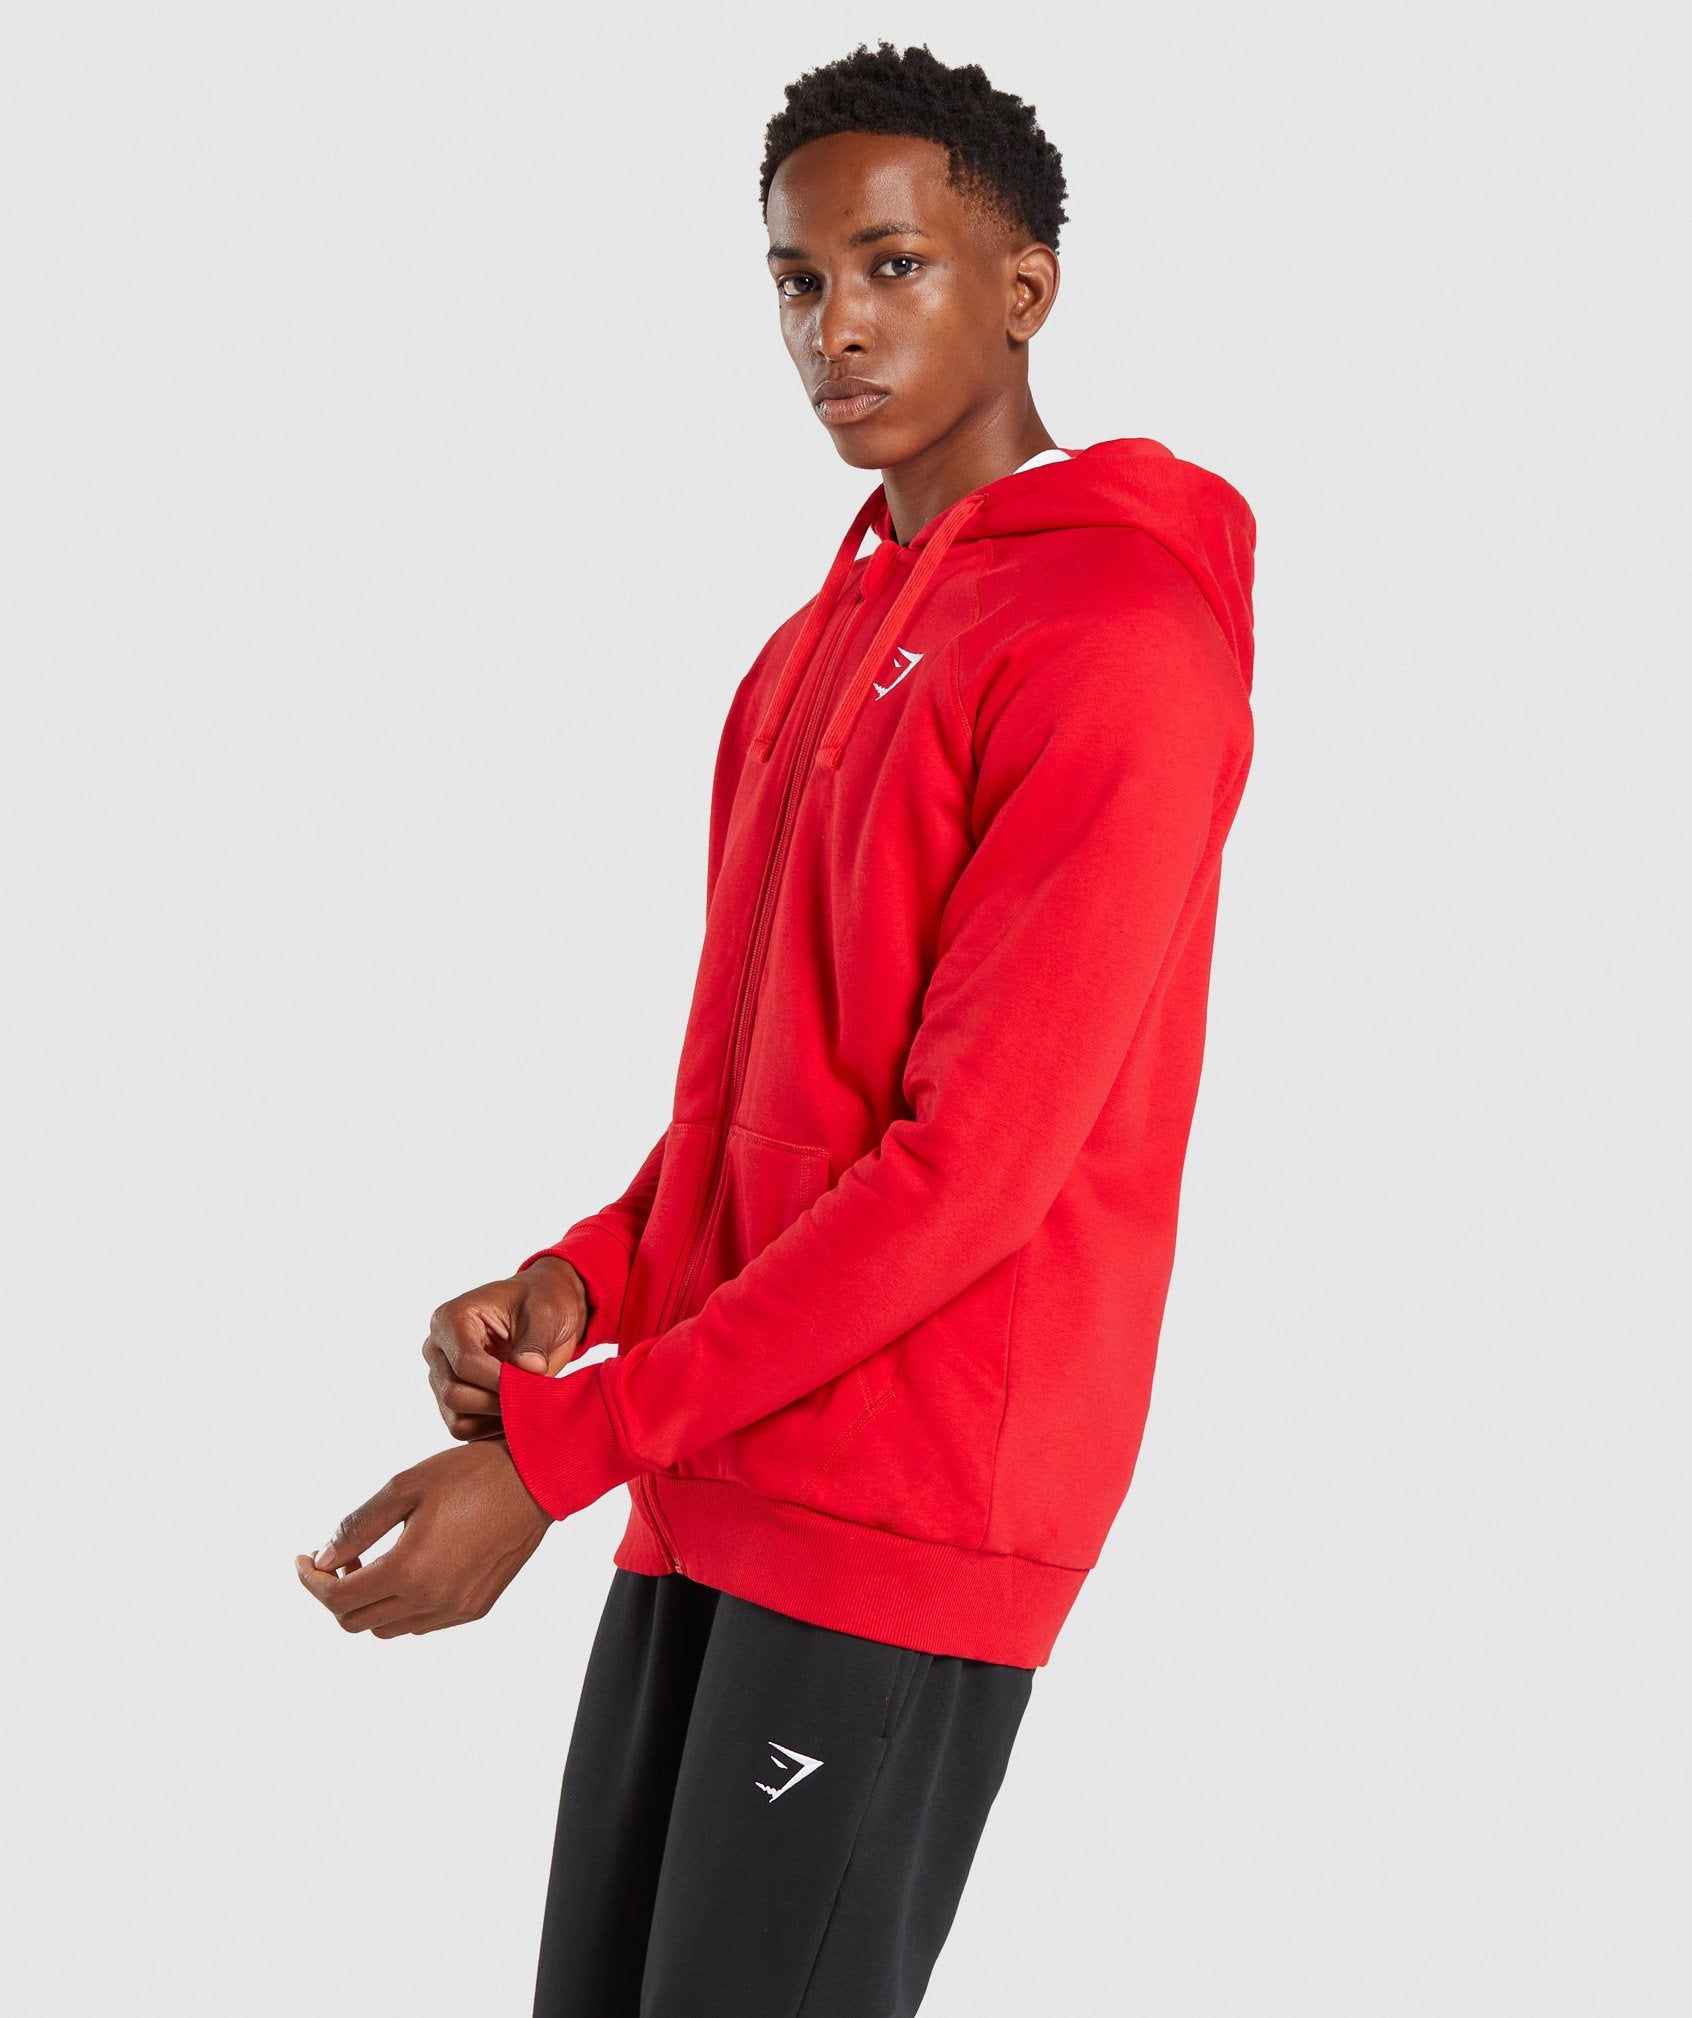 Crest Zip Up Hoodie in Red - view 3